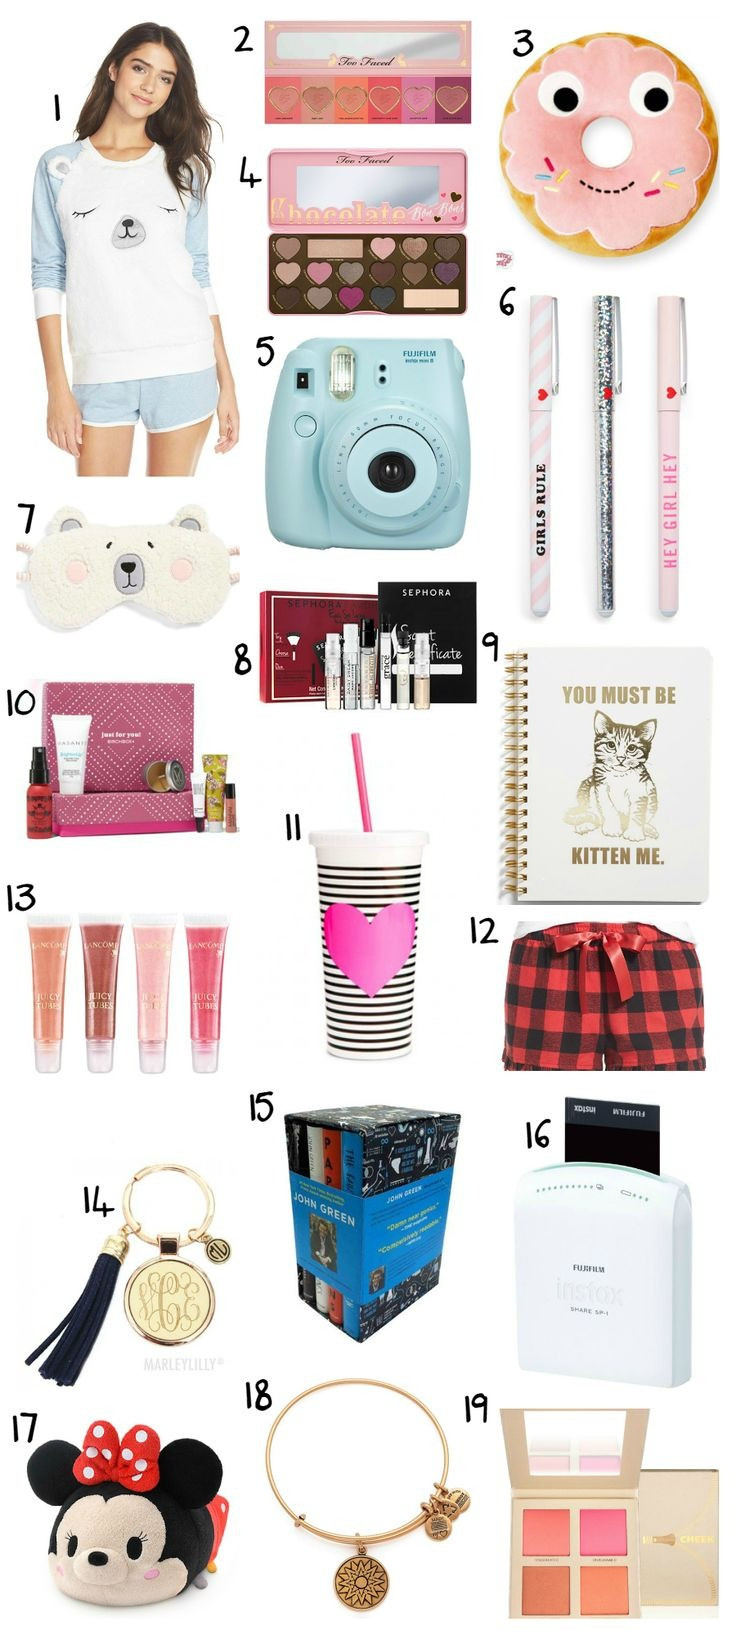 Teenage Girls Birthday Gift Ideas
 What To Get A Teenage Girl For Christmas